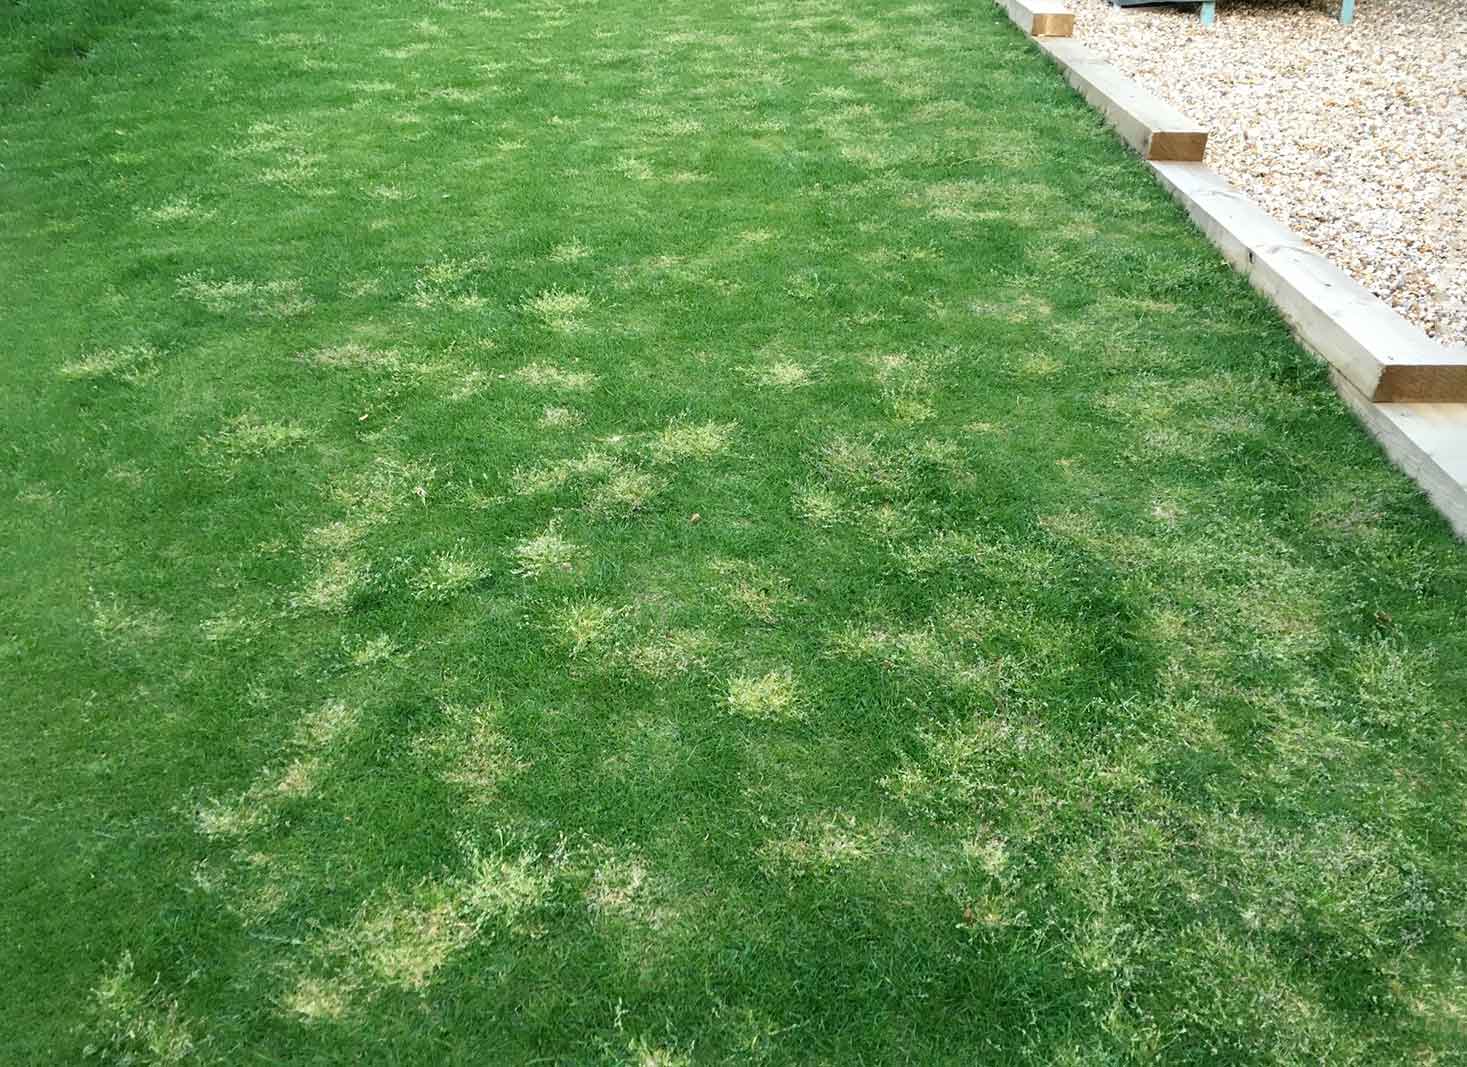 Identifying Light Green Grass Patches on Your Lawn